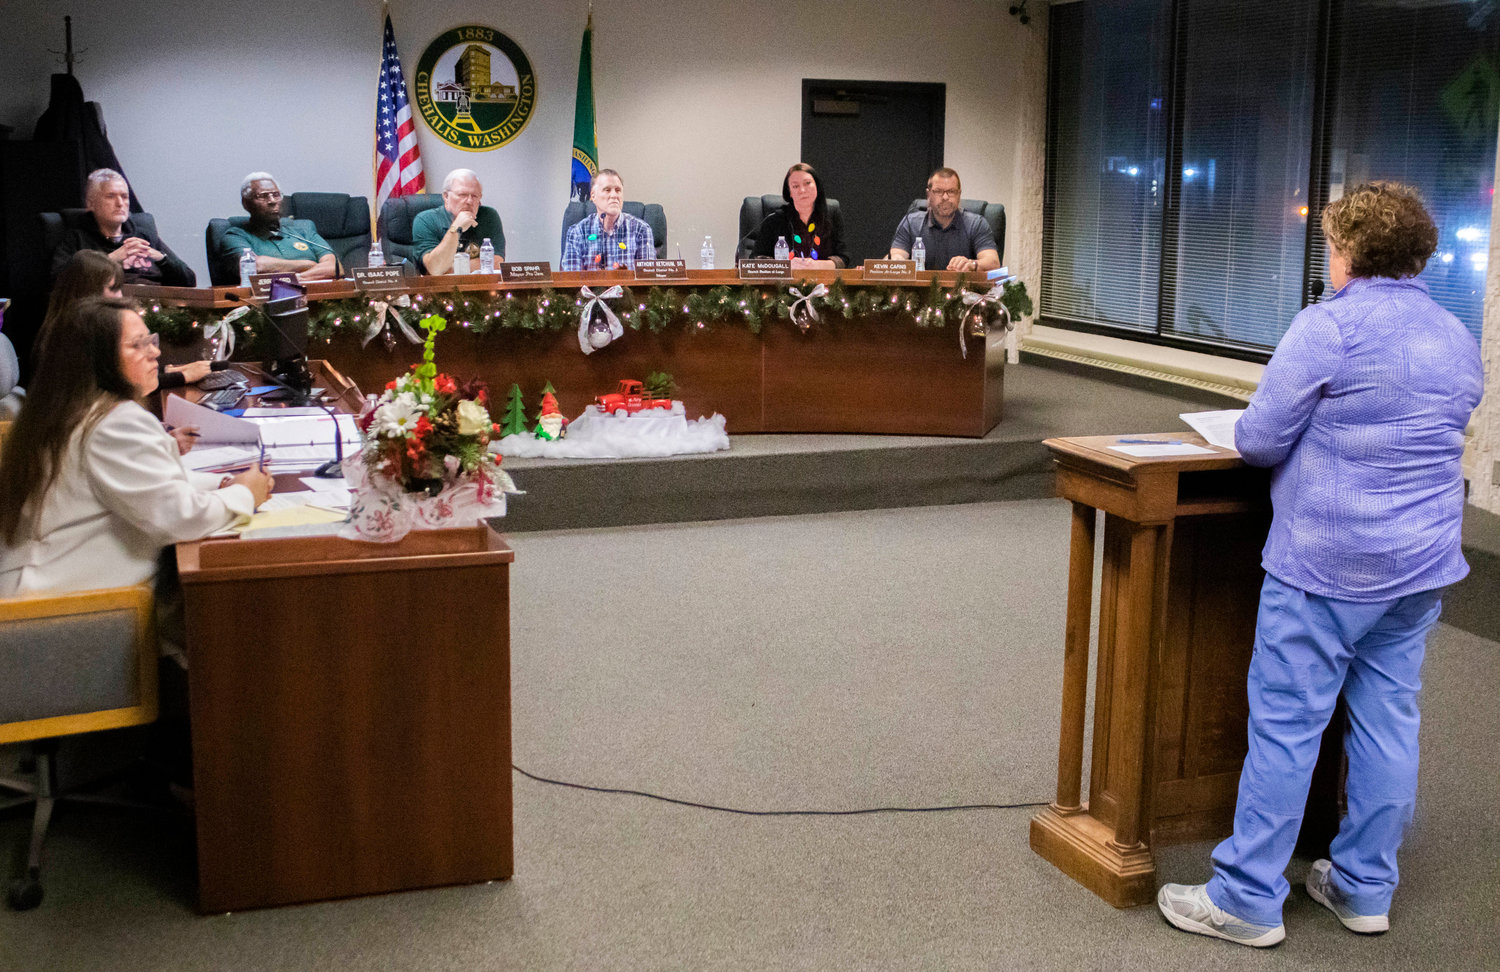 Providence Centralia Hospital nurse Diane Stedham-Jewell speaks out during the public comment section of Chehalis City Council’s regular meeting Monday night to ask for support in addressing staffing and safety issues she and her fellow nurses face every day at the hospital.